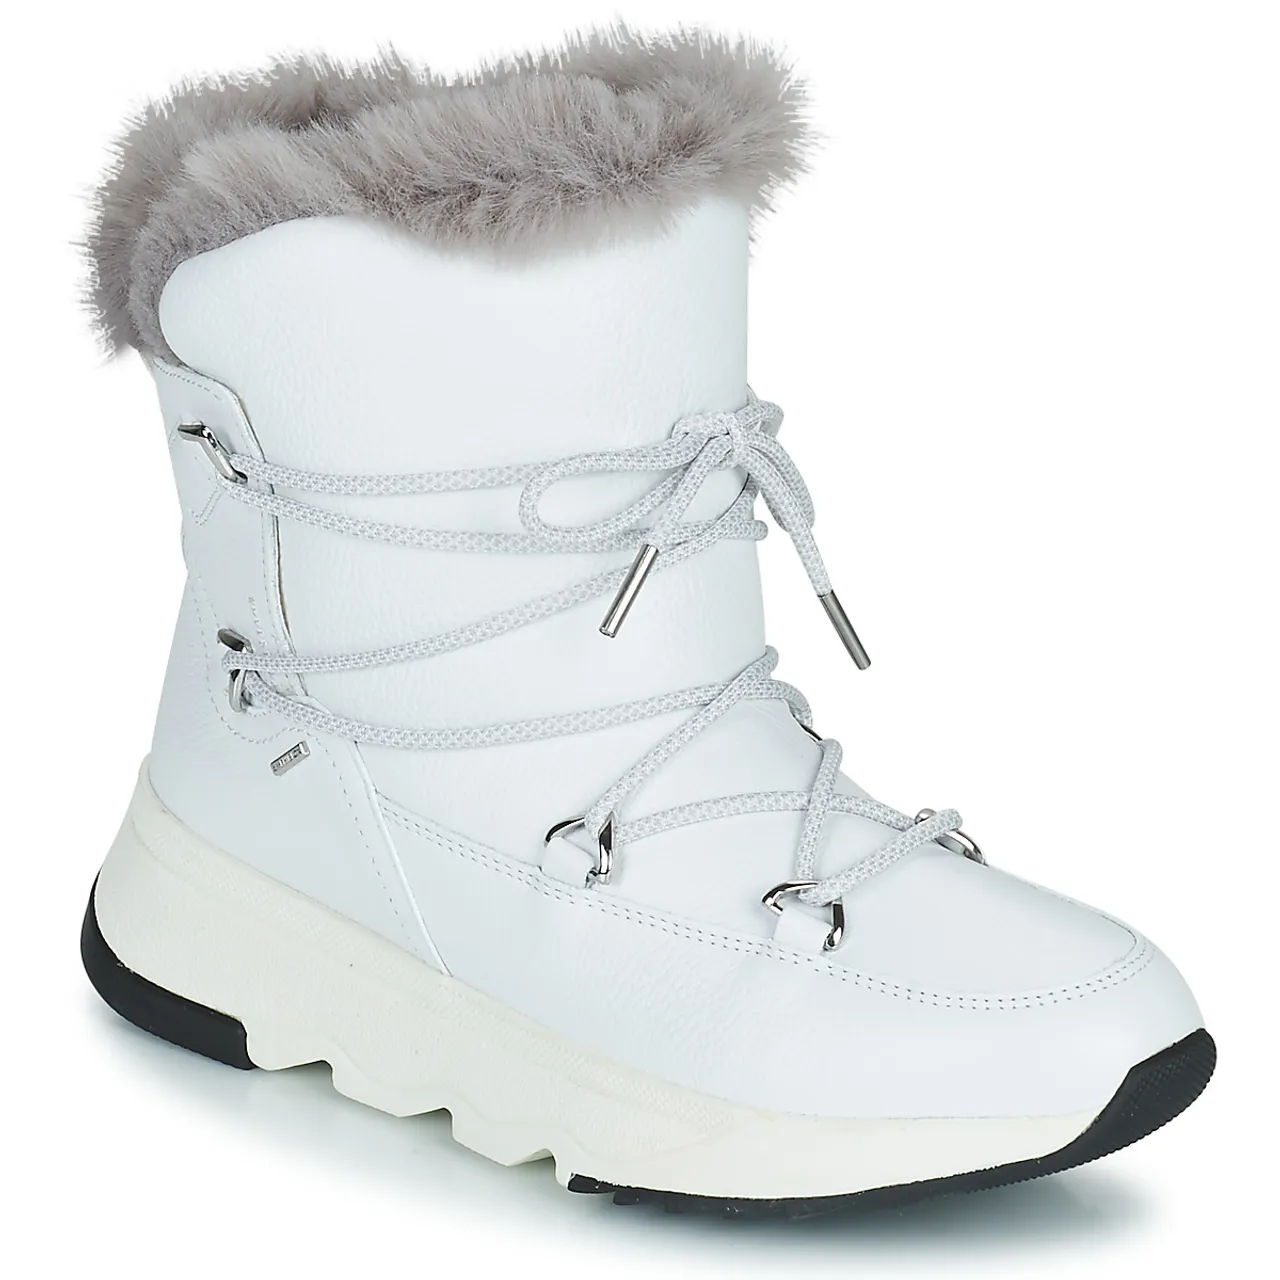 Geox  FALENA ABX  women's Snow boots in White